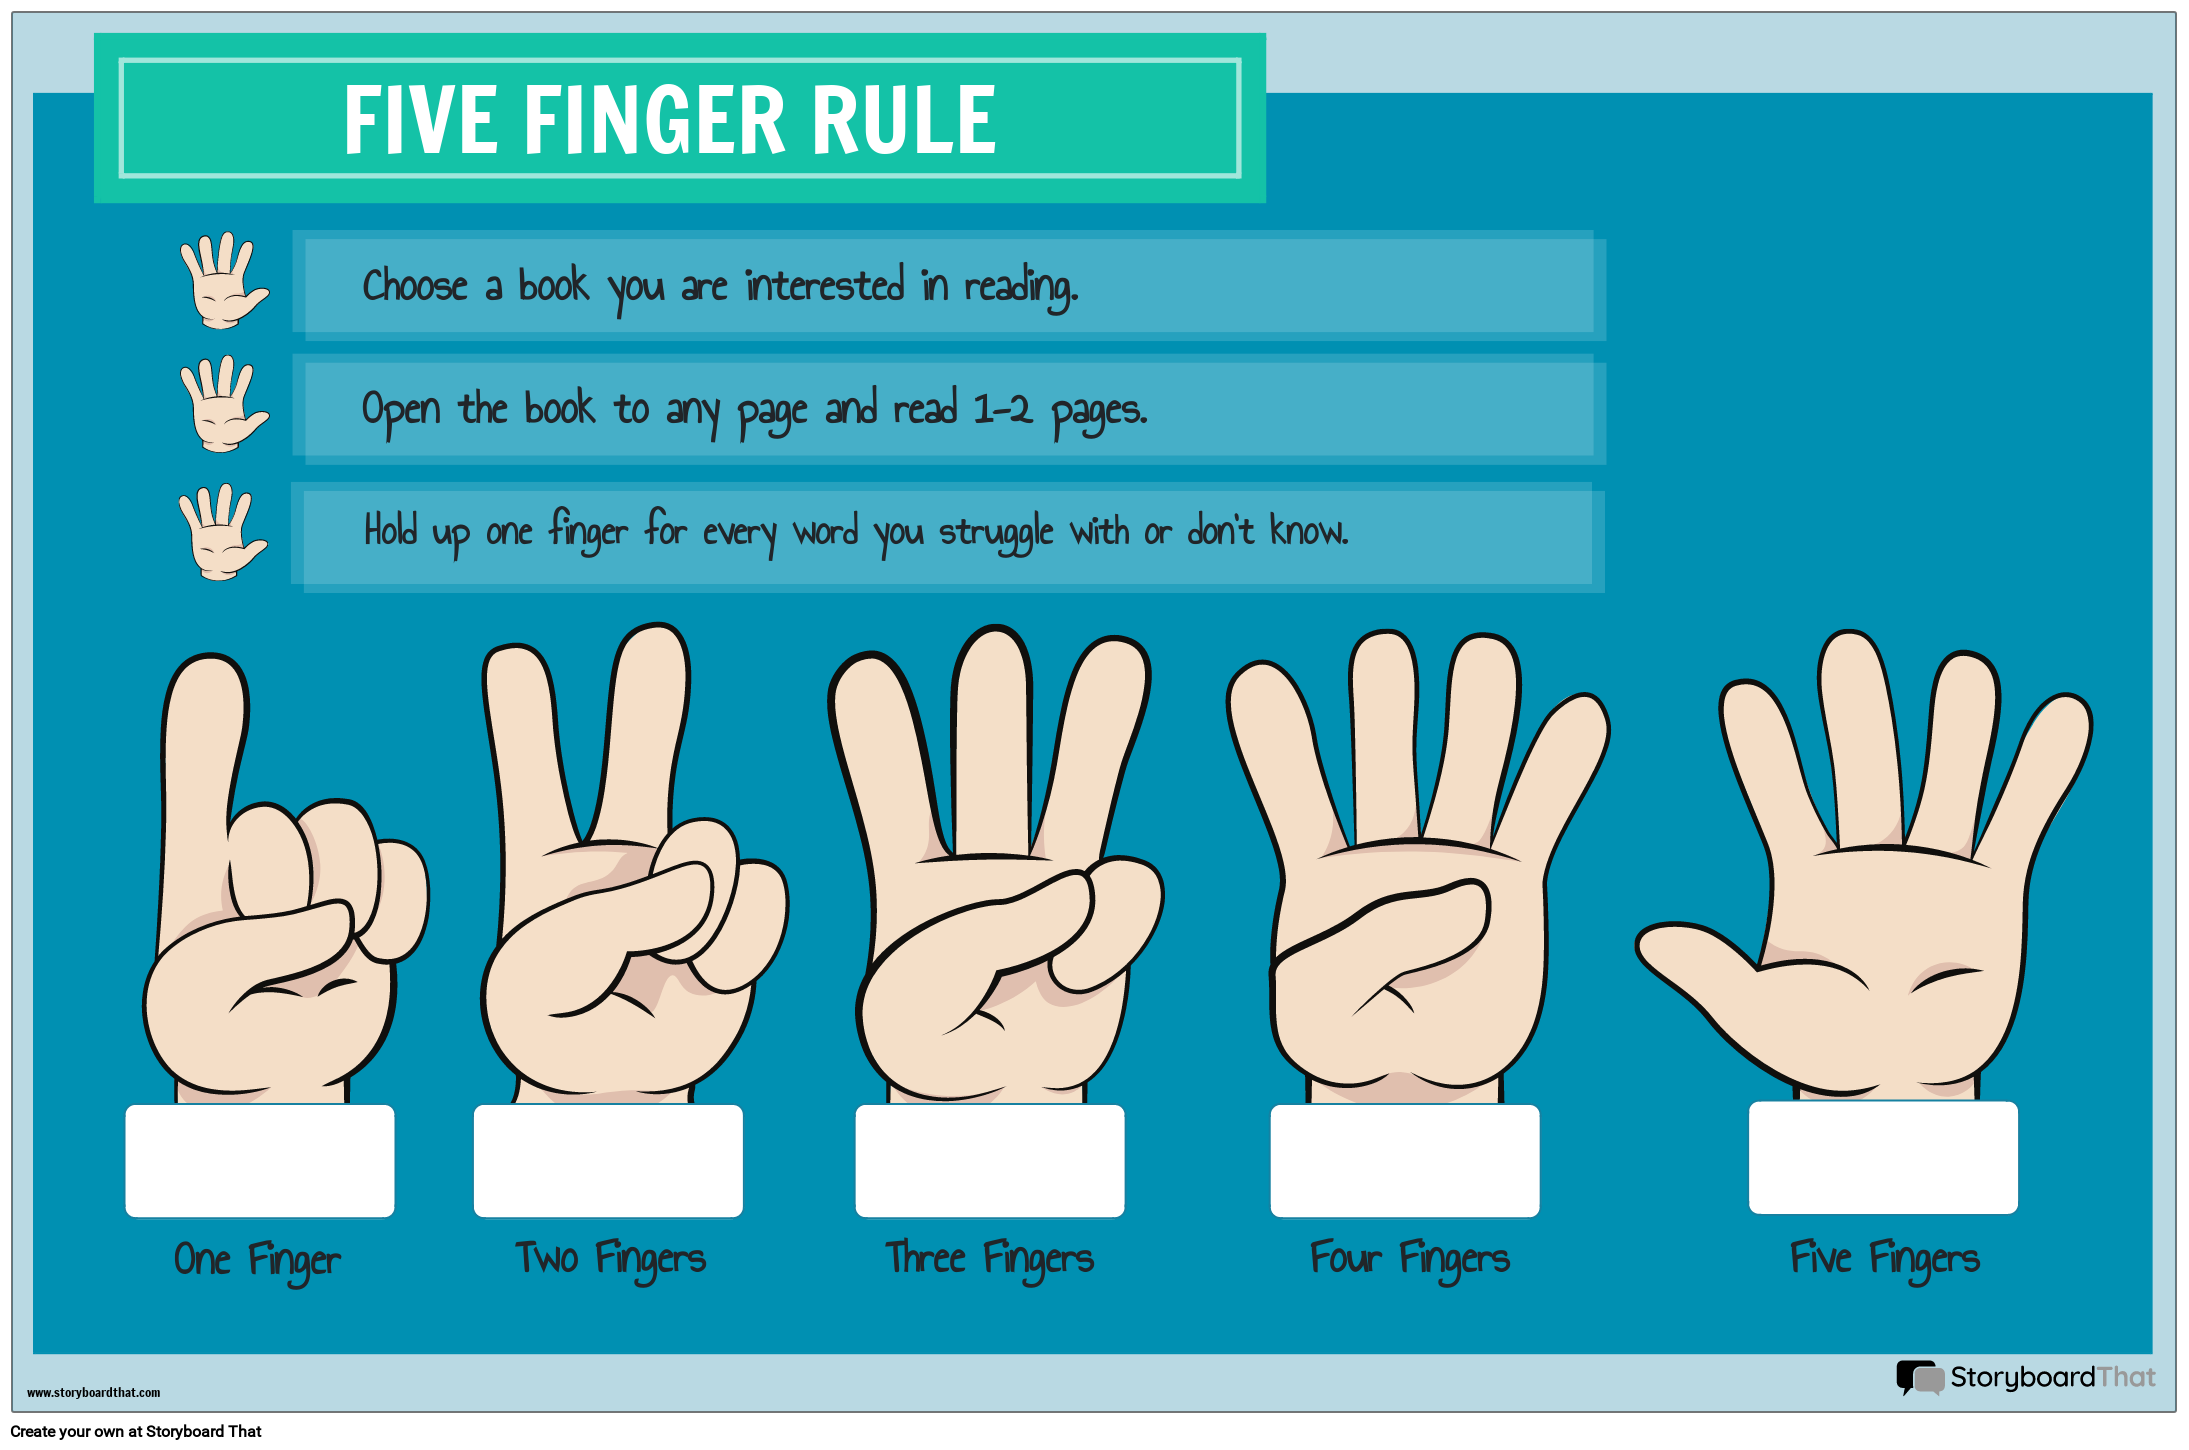 5 Finger Rule - Just Right Book Poster